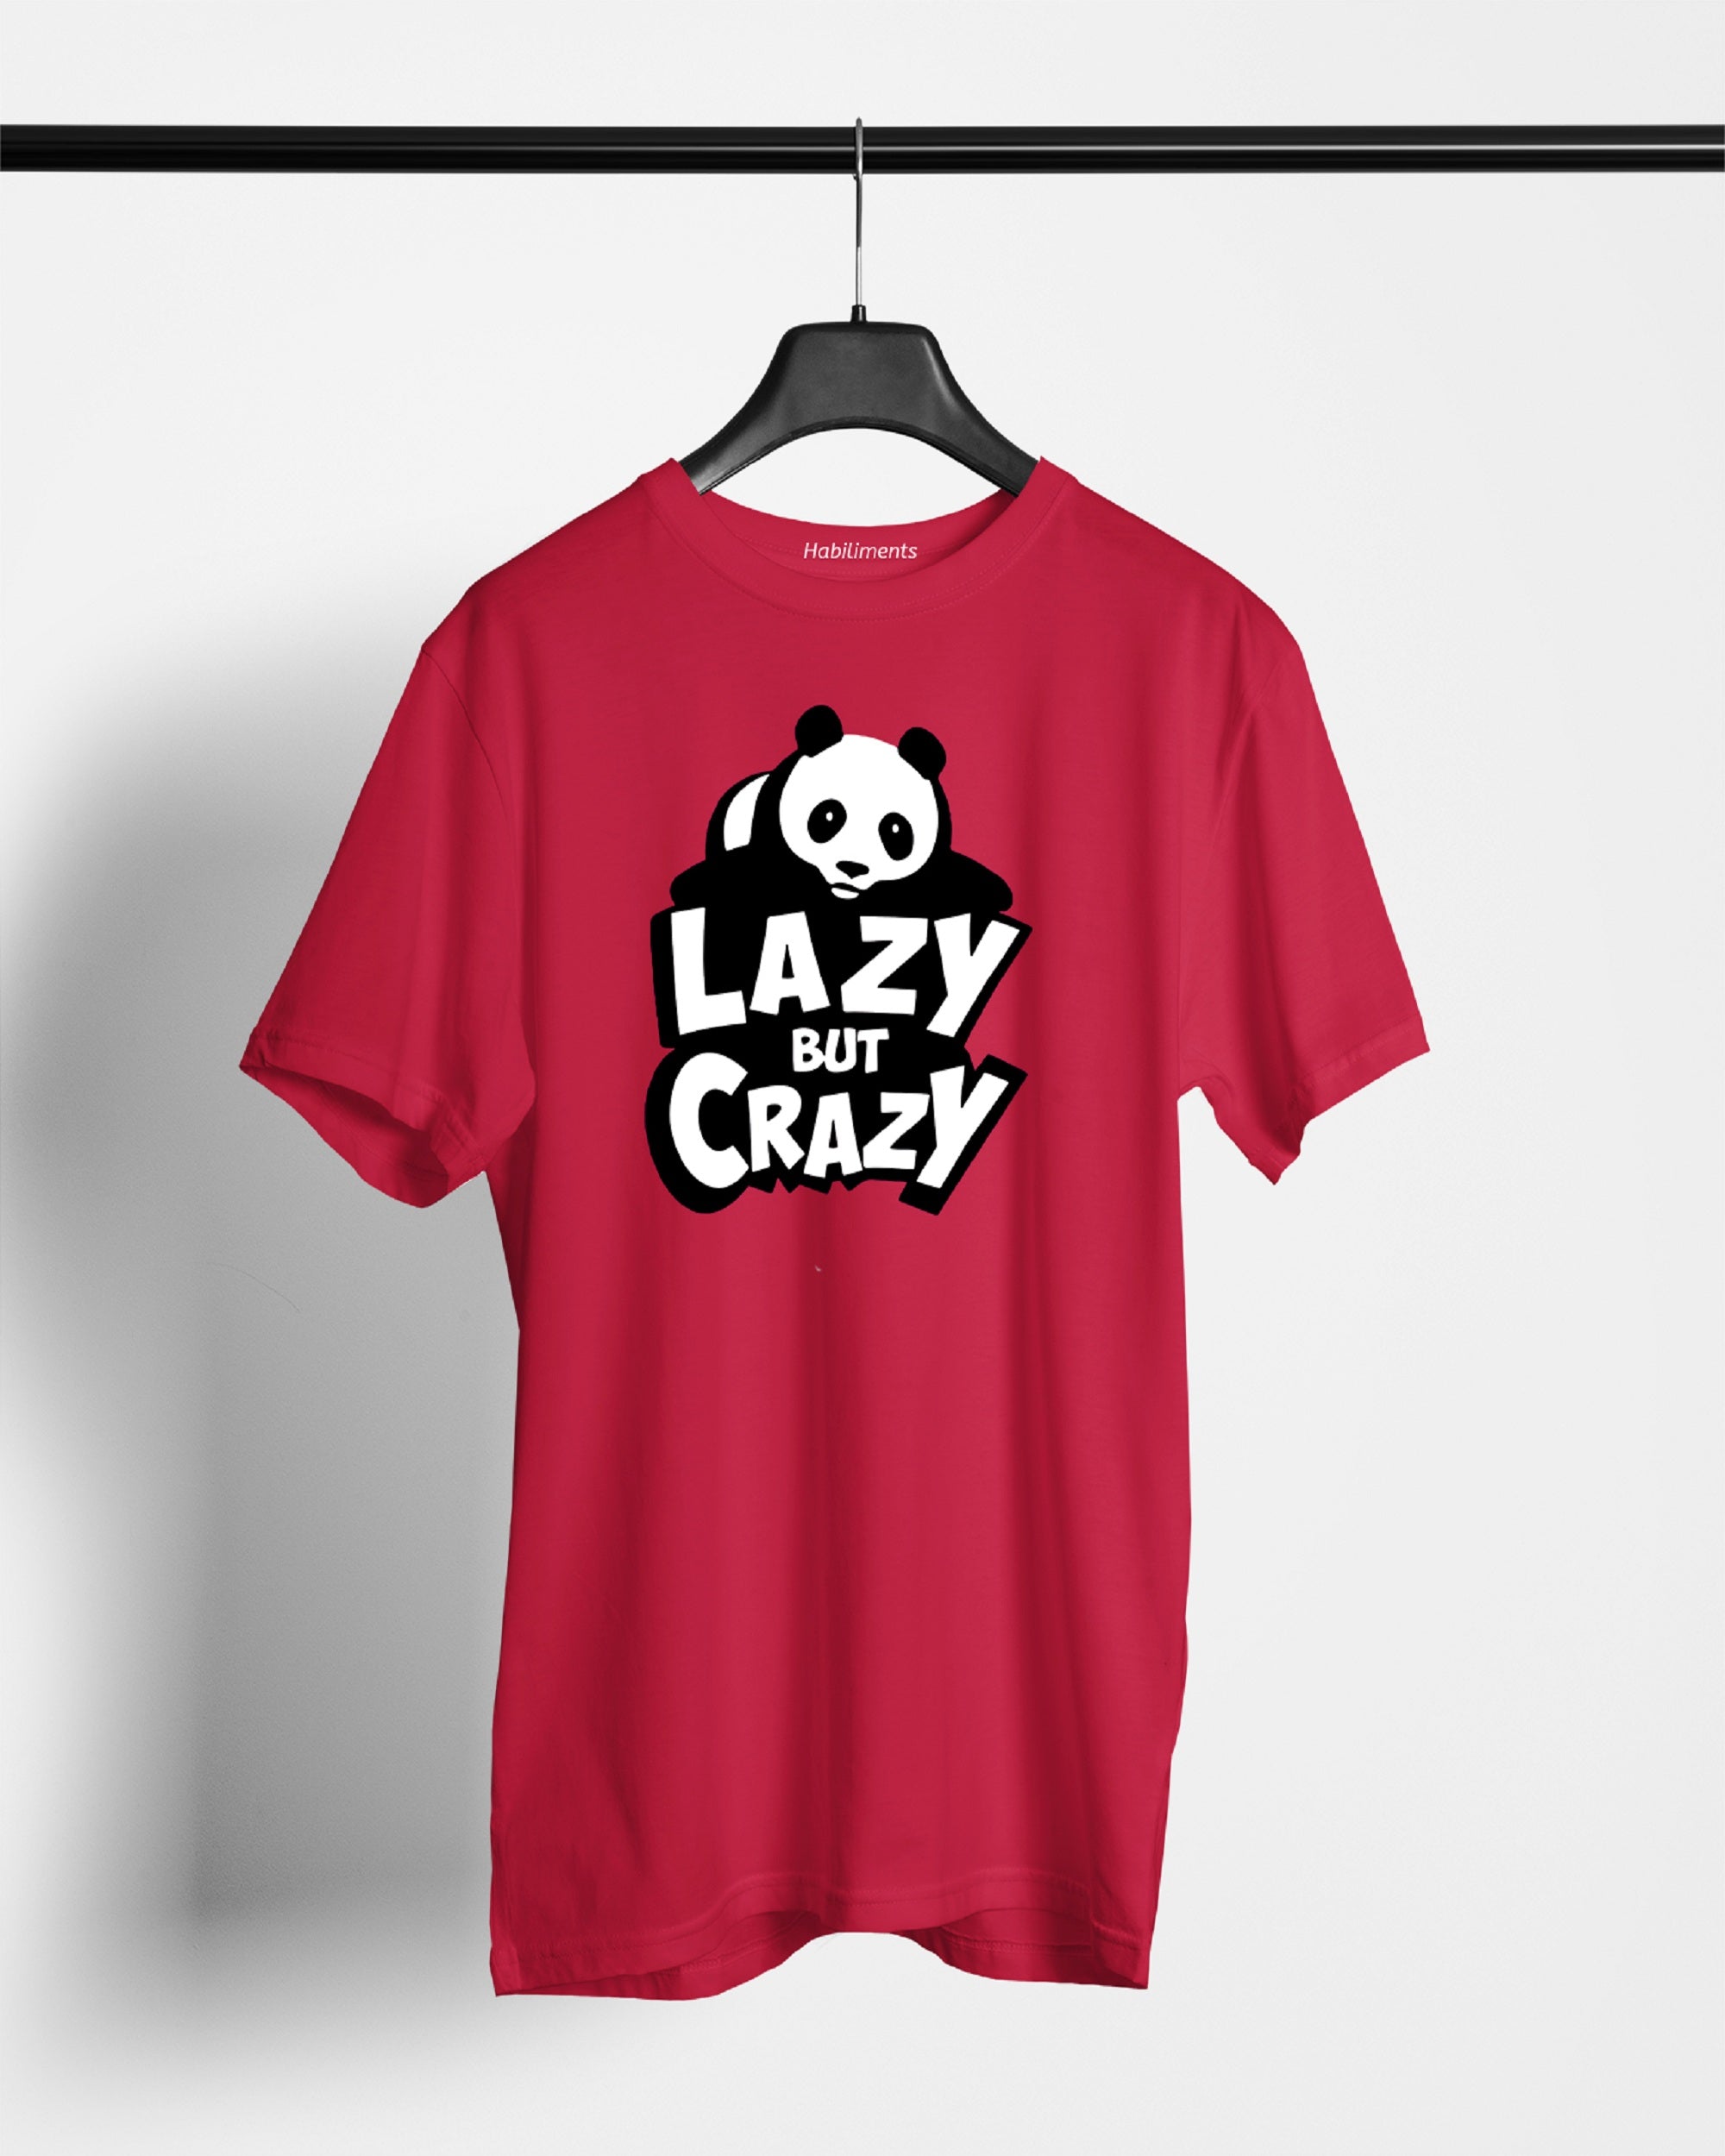 Lazy But Crazy T-Shirts For Men || Maroon || Stylish Tshirts || 100% Cotton || Best T-Shirt For Men's